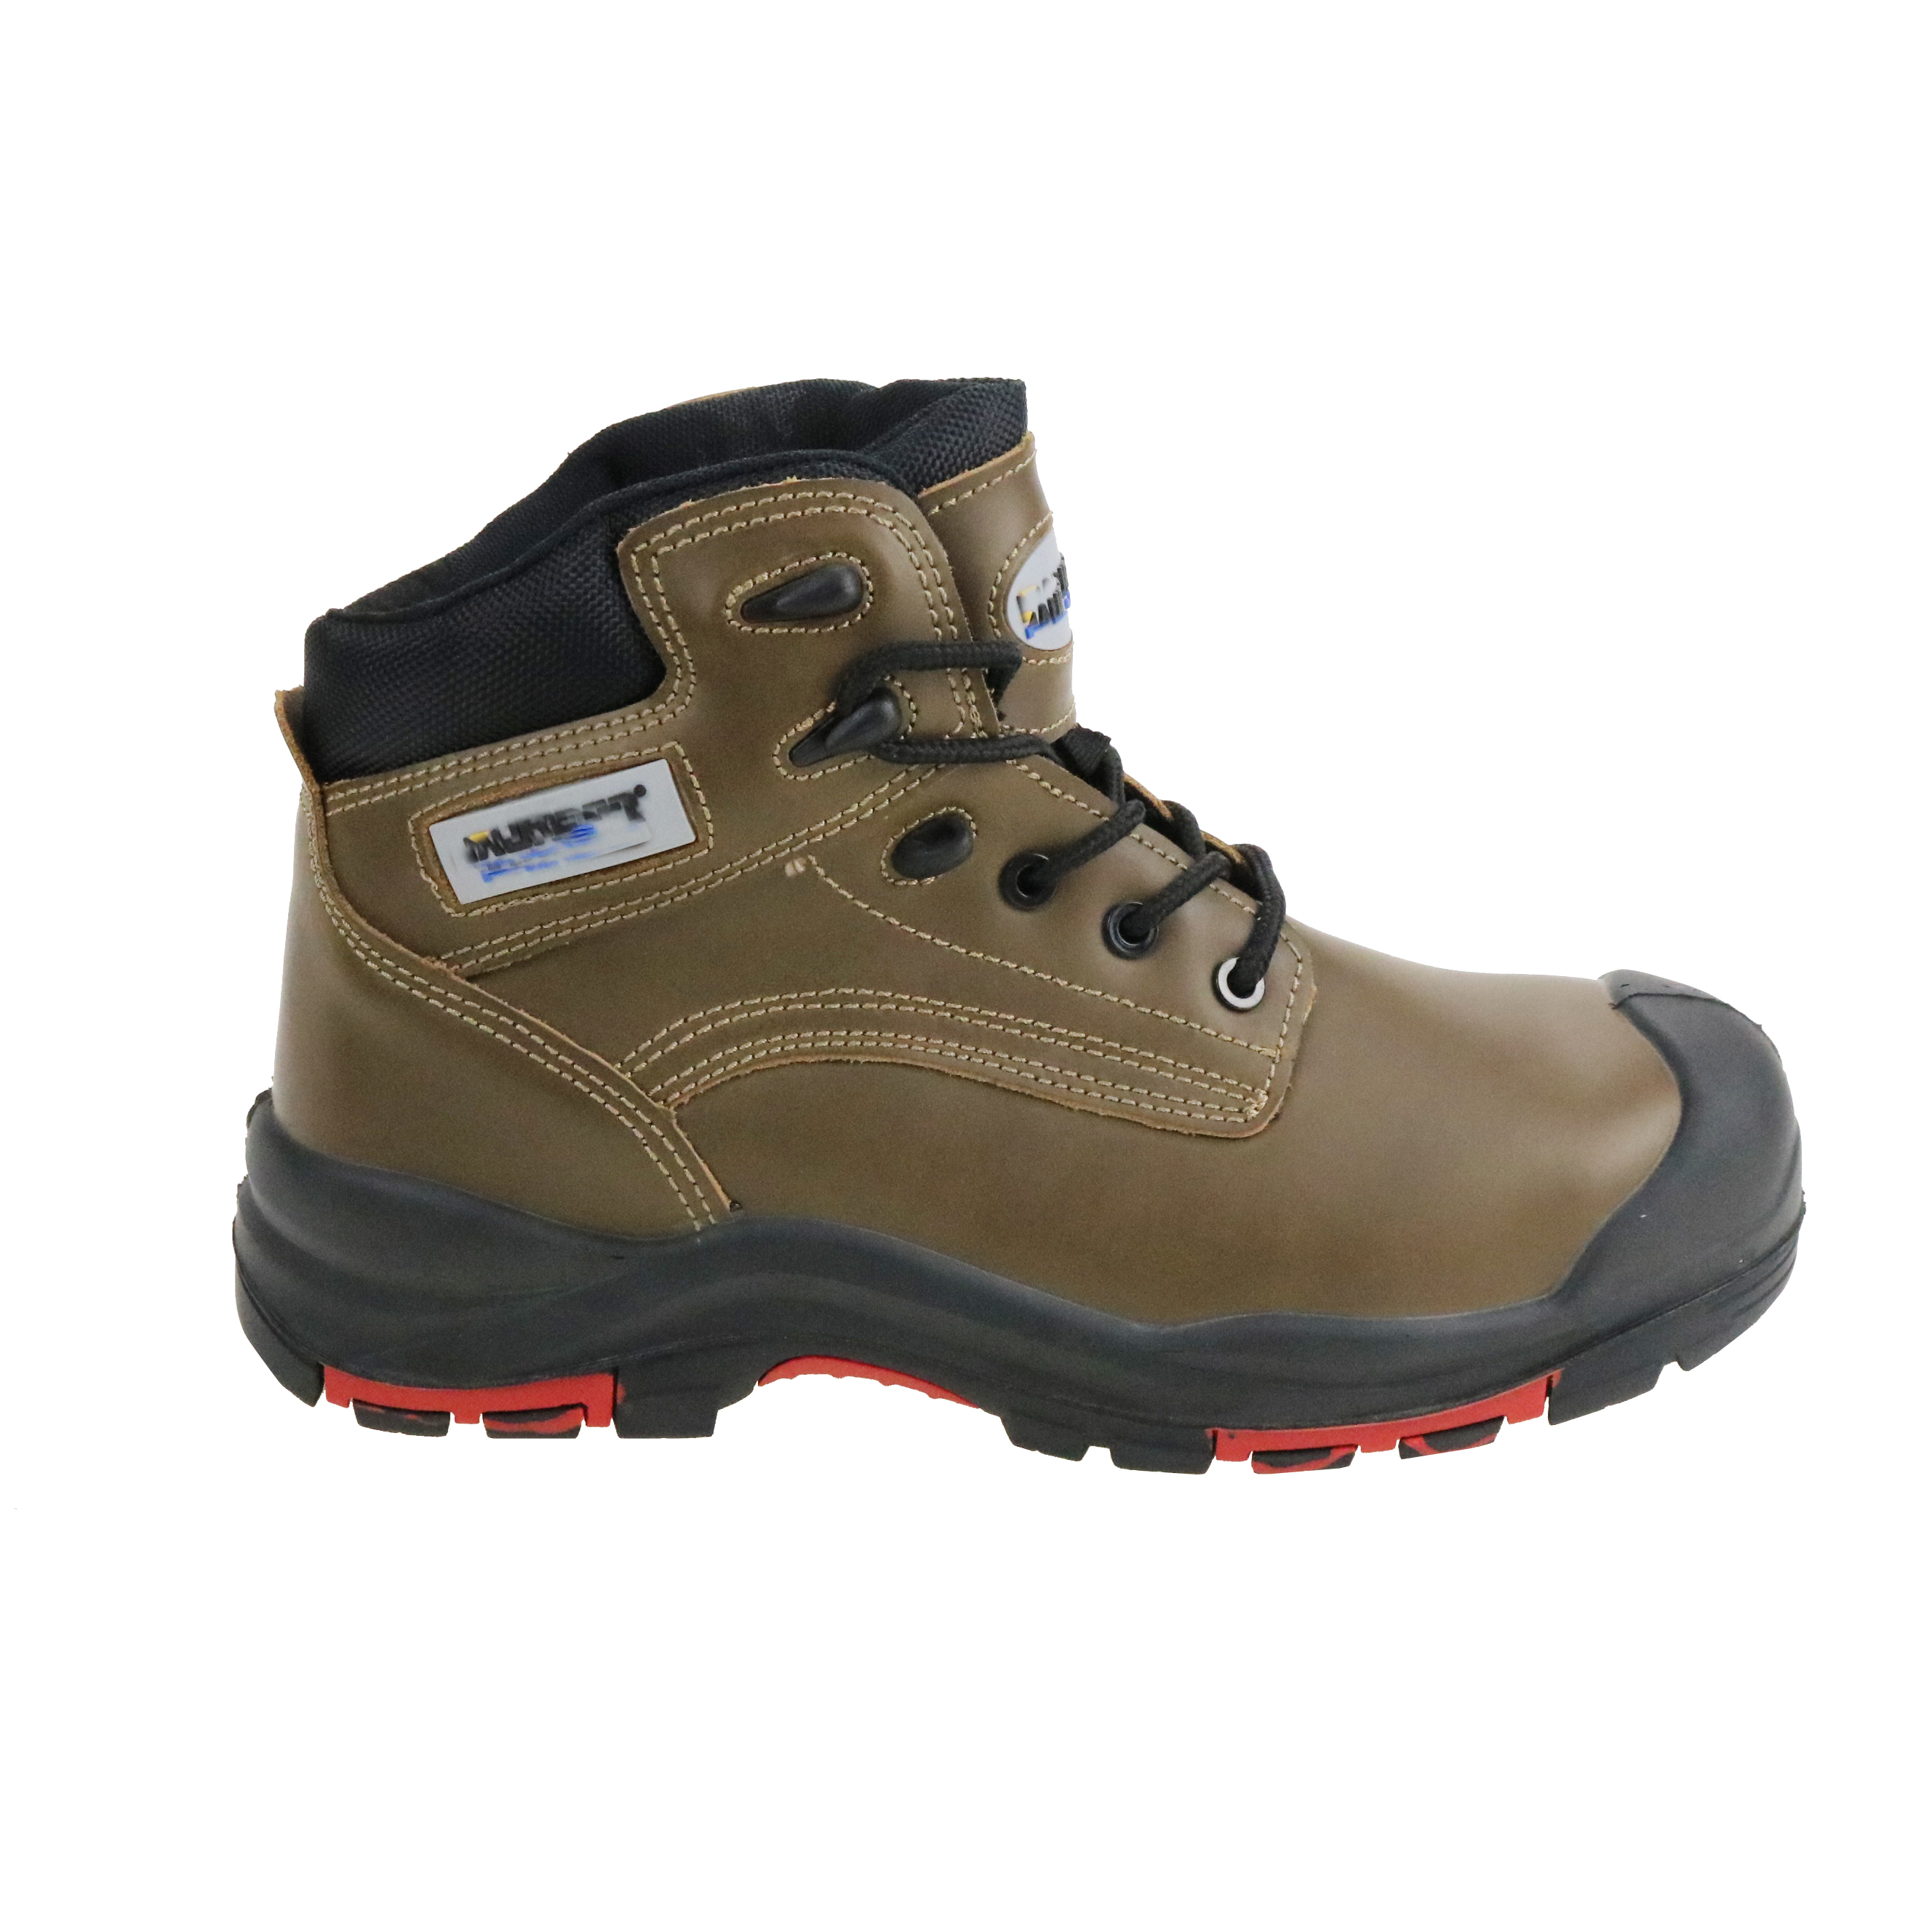 Best brand steel toe industrial work boot safety shoes cheap price mens working boots &high temperature resistance